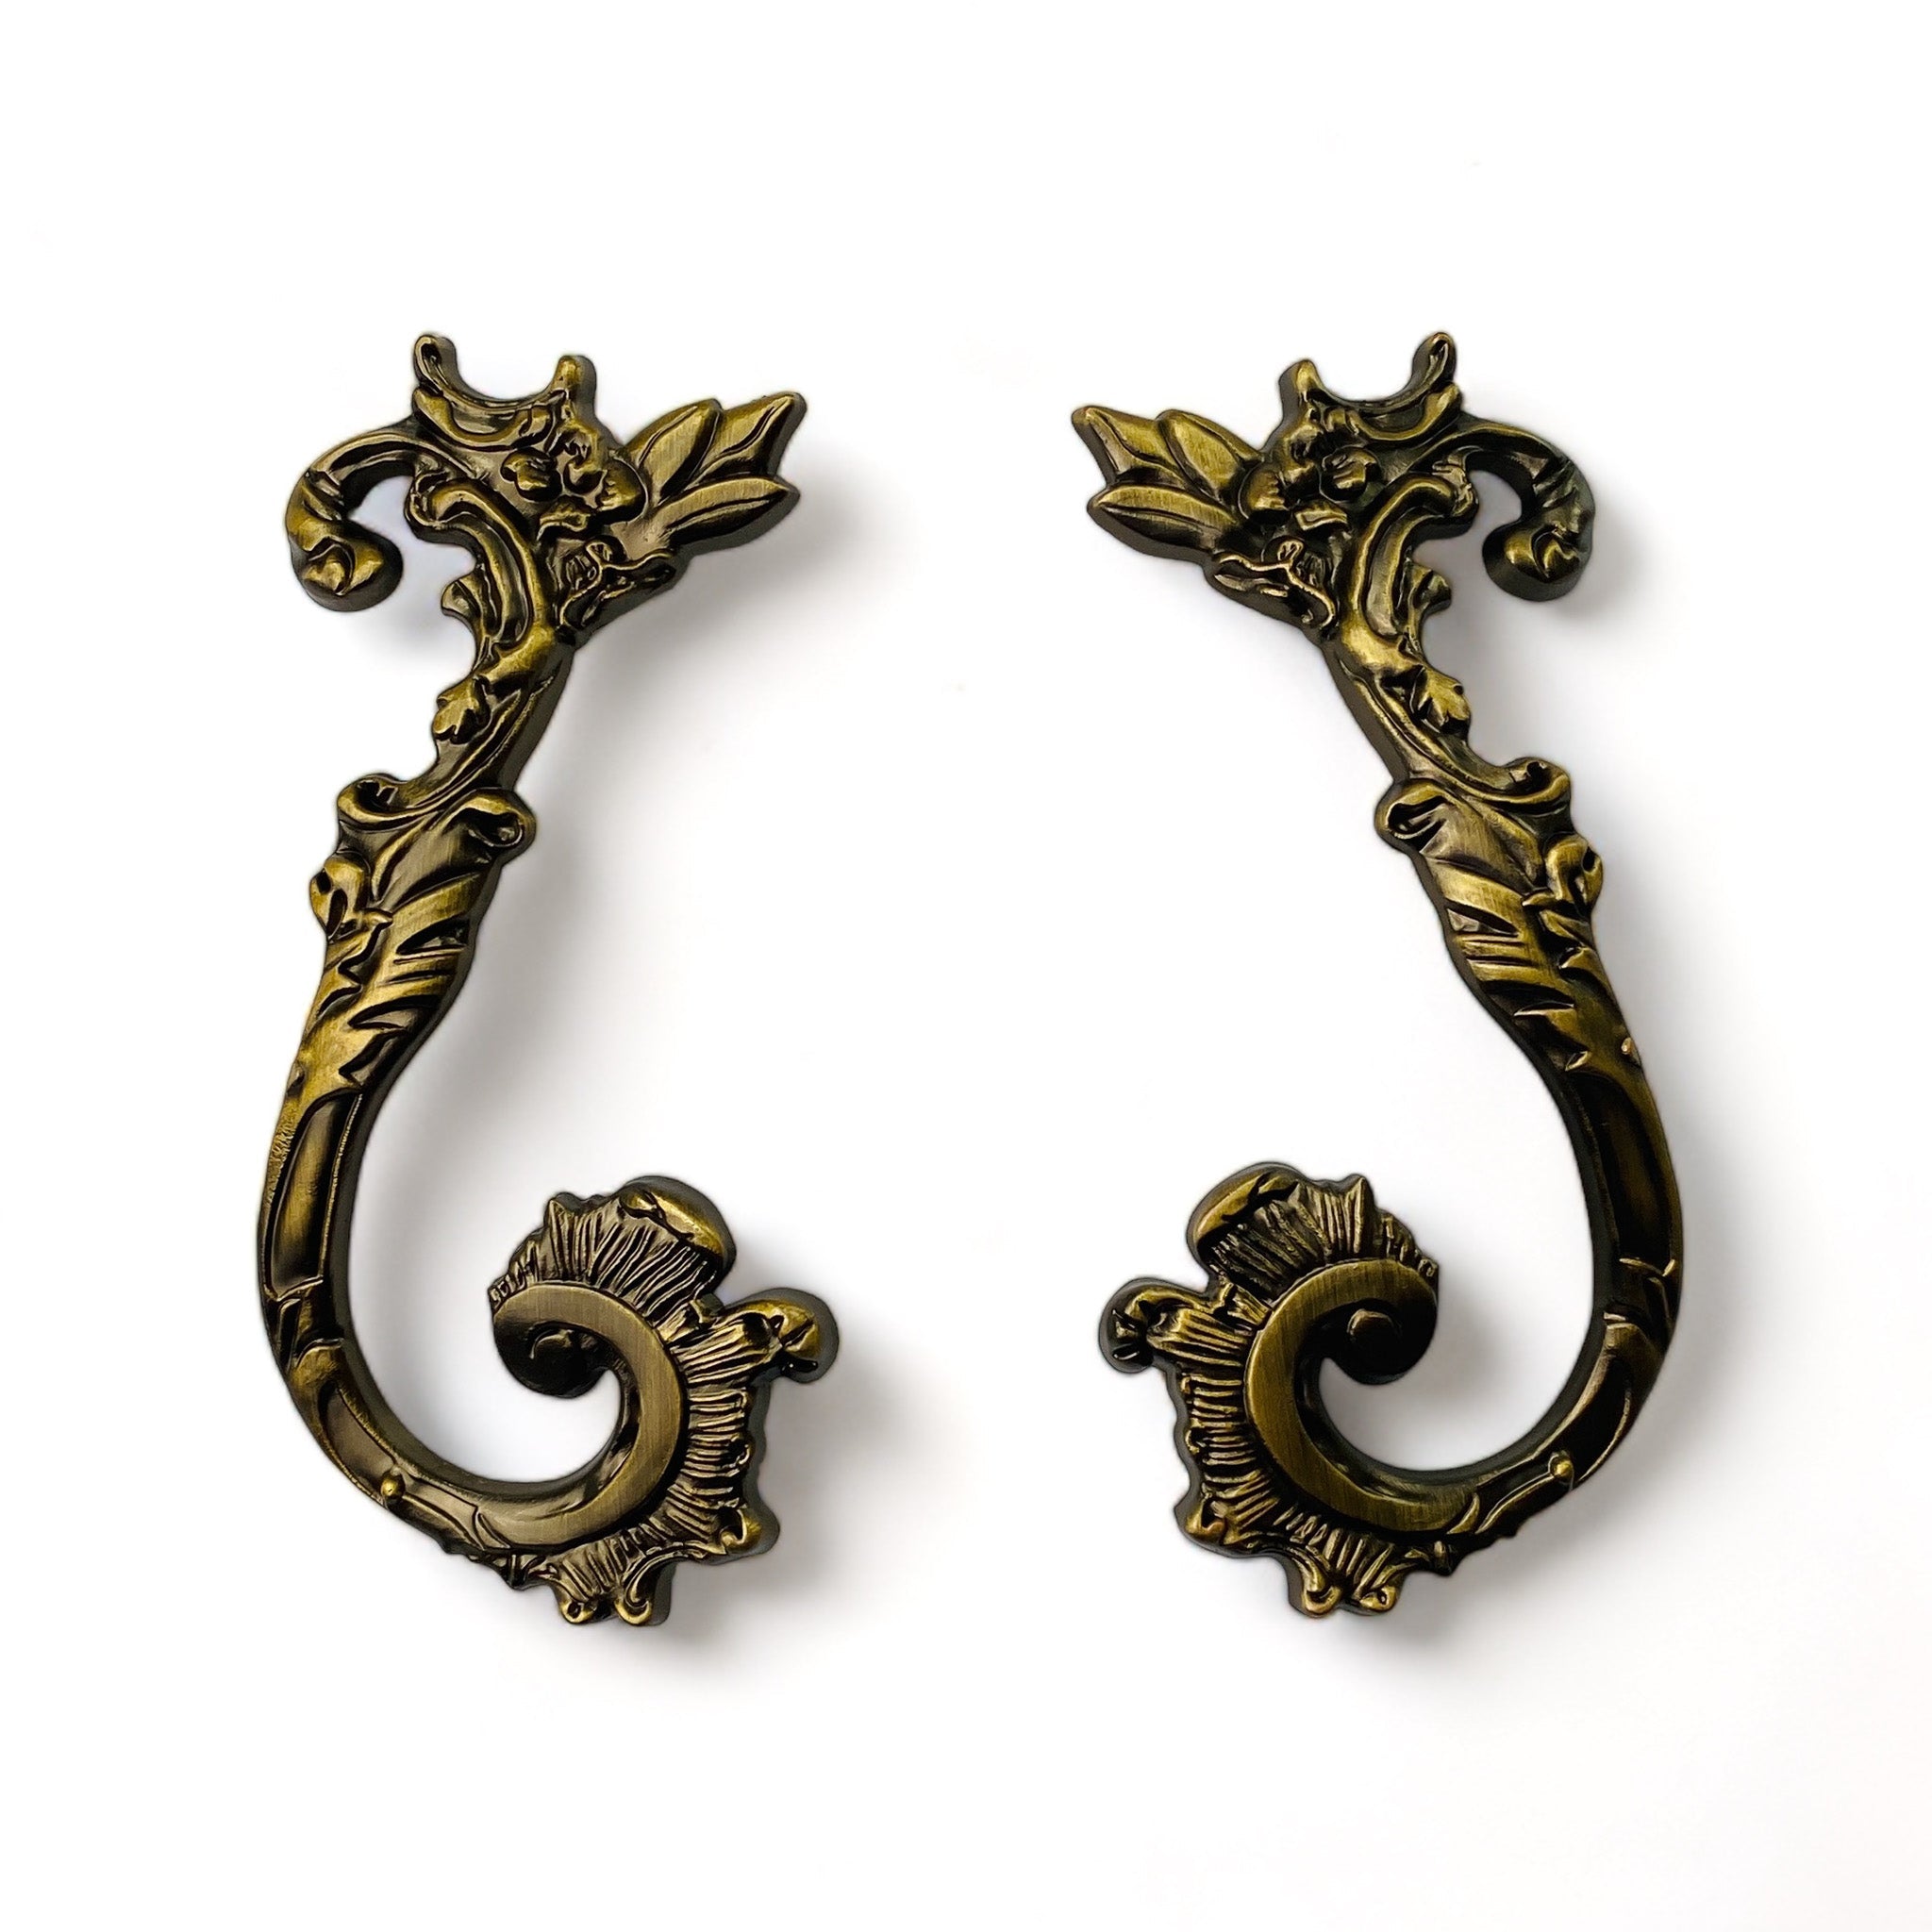 Two metal drawer pulls featuring swirling flourished and floral details are against a white background.